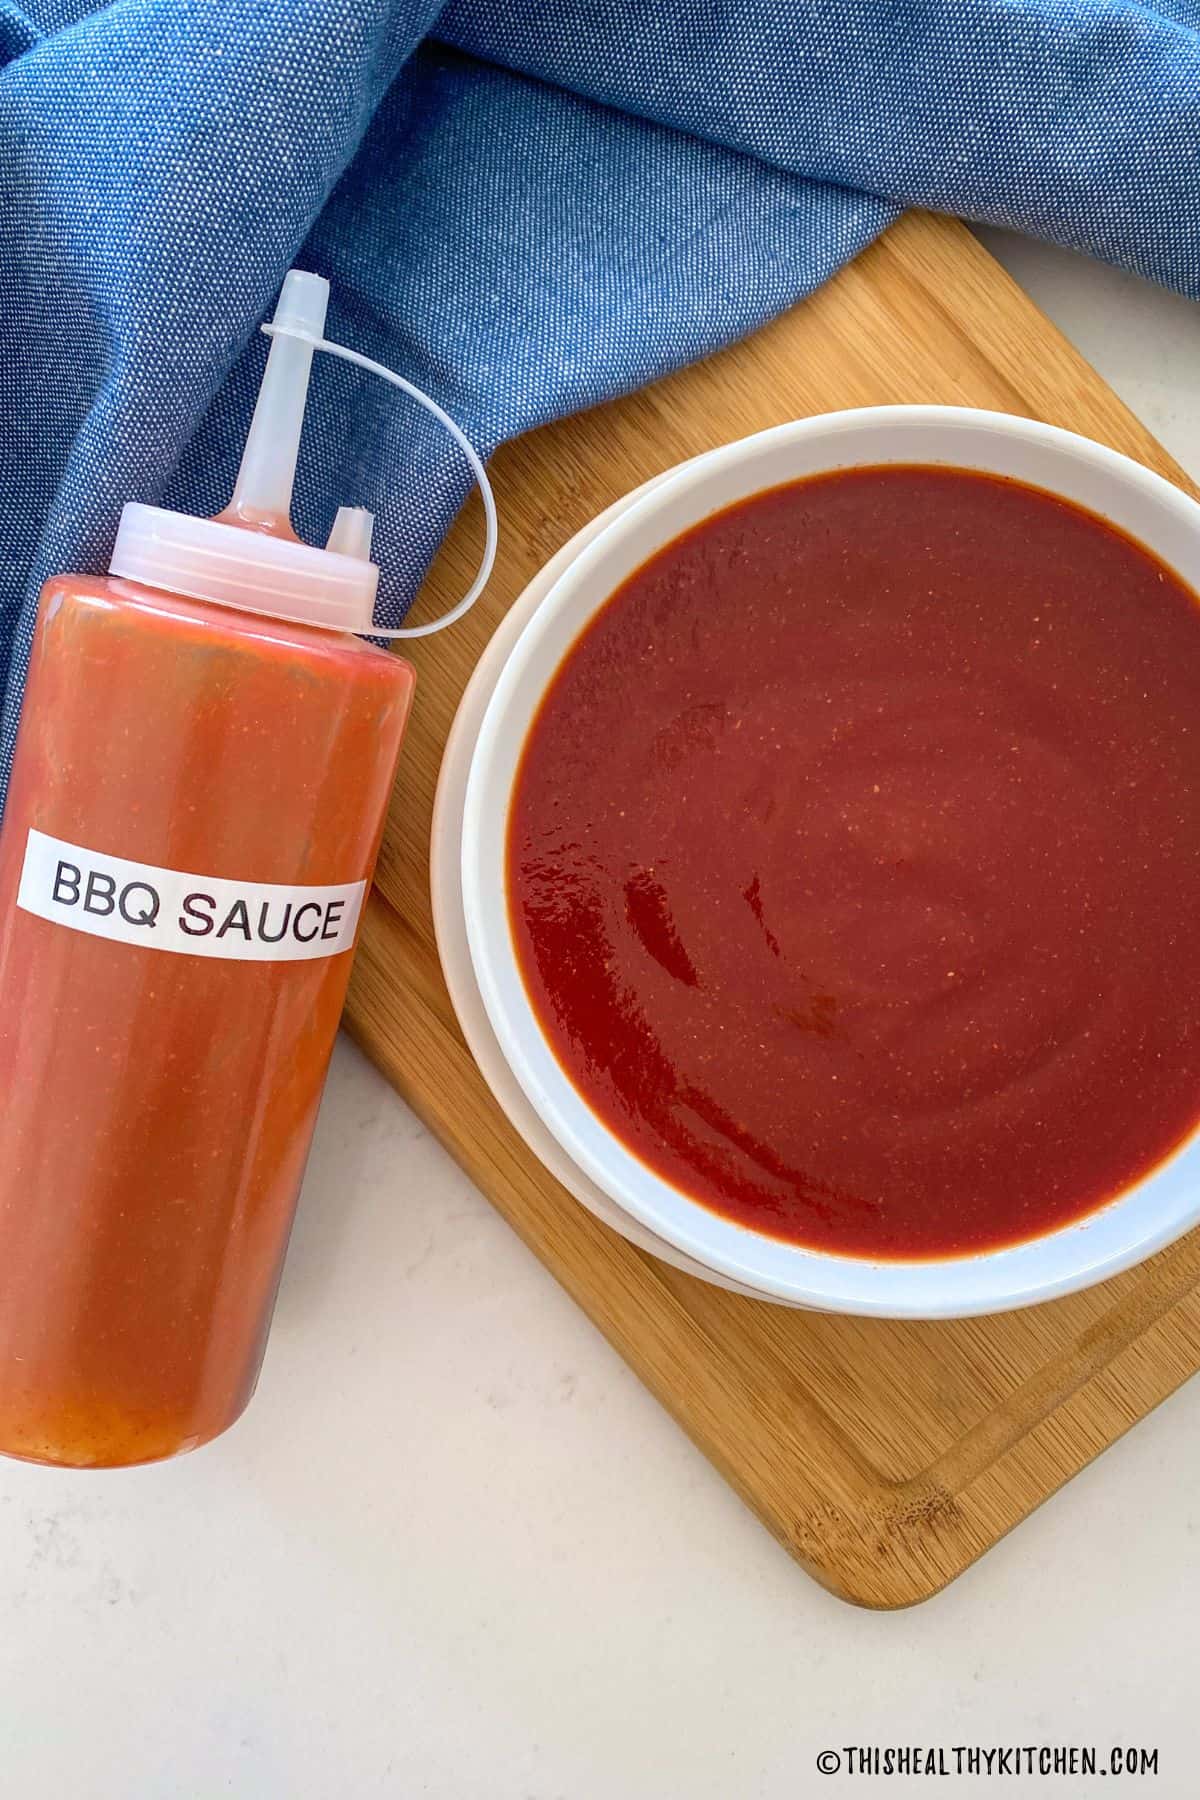 White bowl with red sauce inside and bottle beside it that reads BBQ sauce.